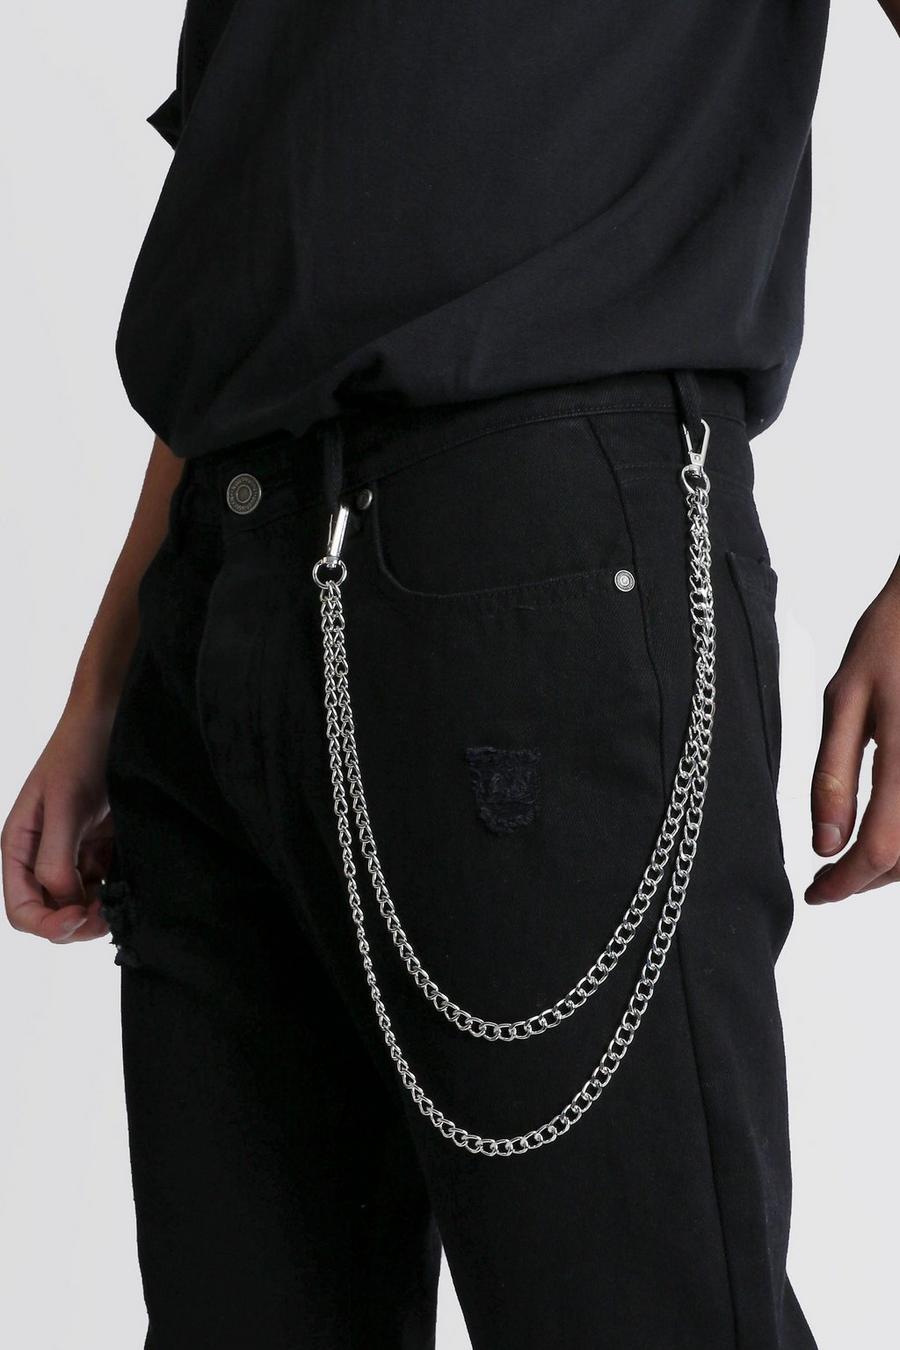 Jean Chains For Men